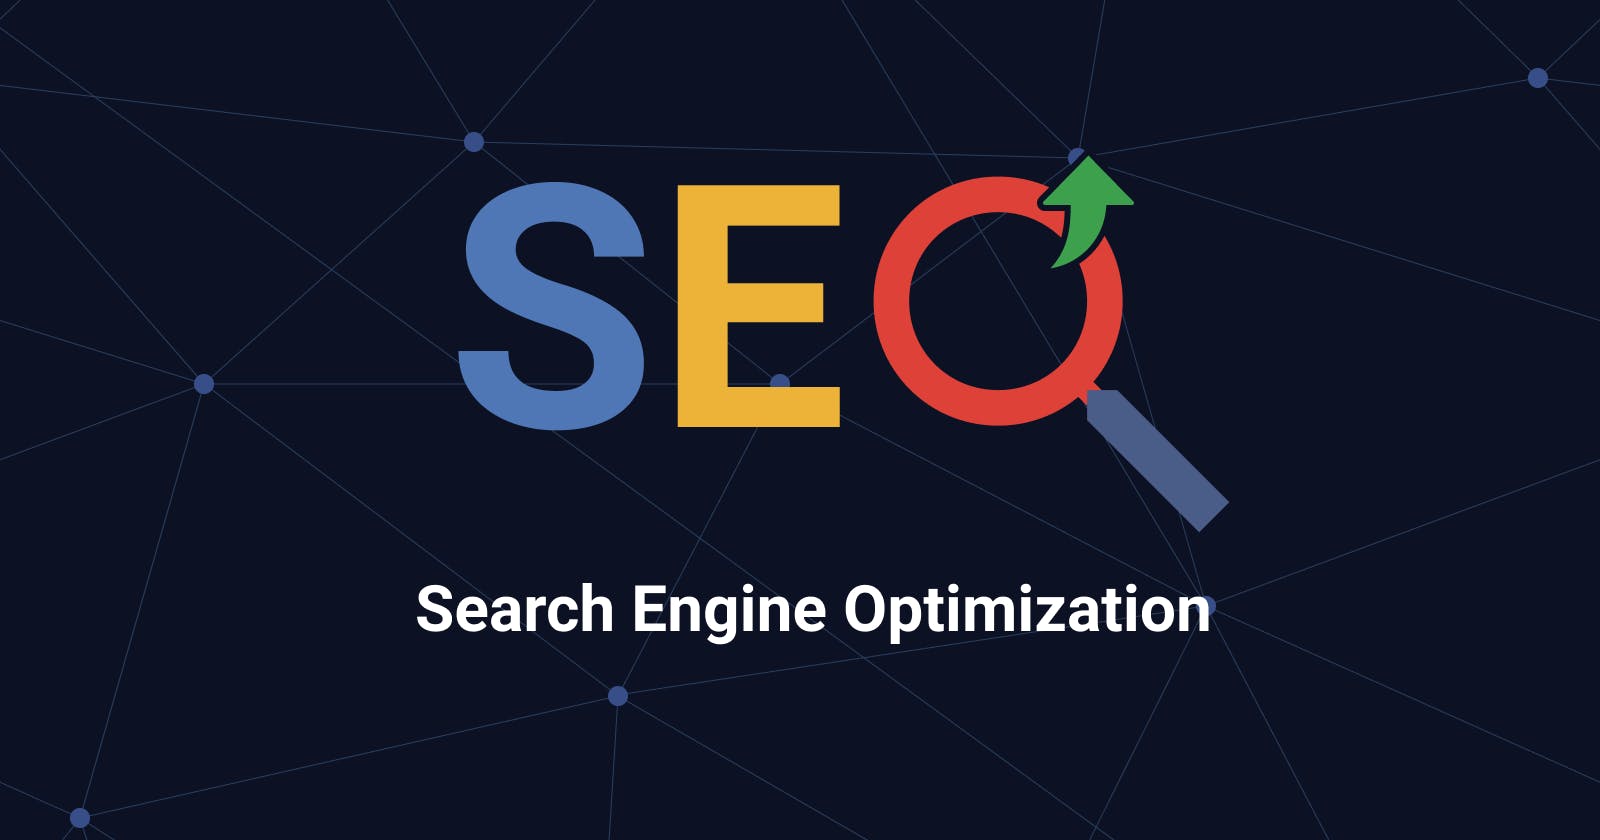 Introduction to SEO (Search Engine Optimization) | What is SEO? | Why SEO is important? | What are Web Crawlers?